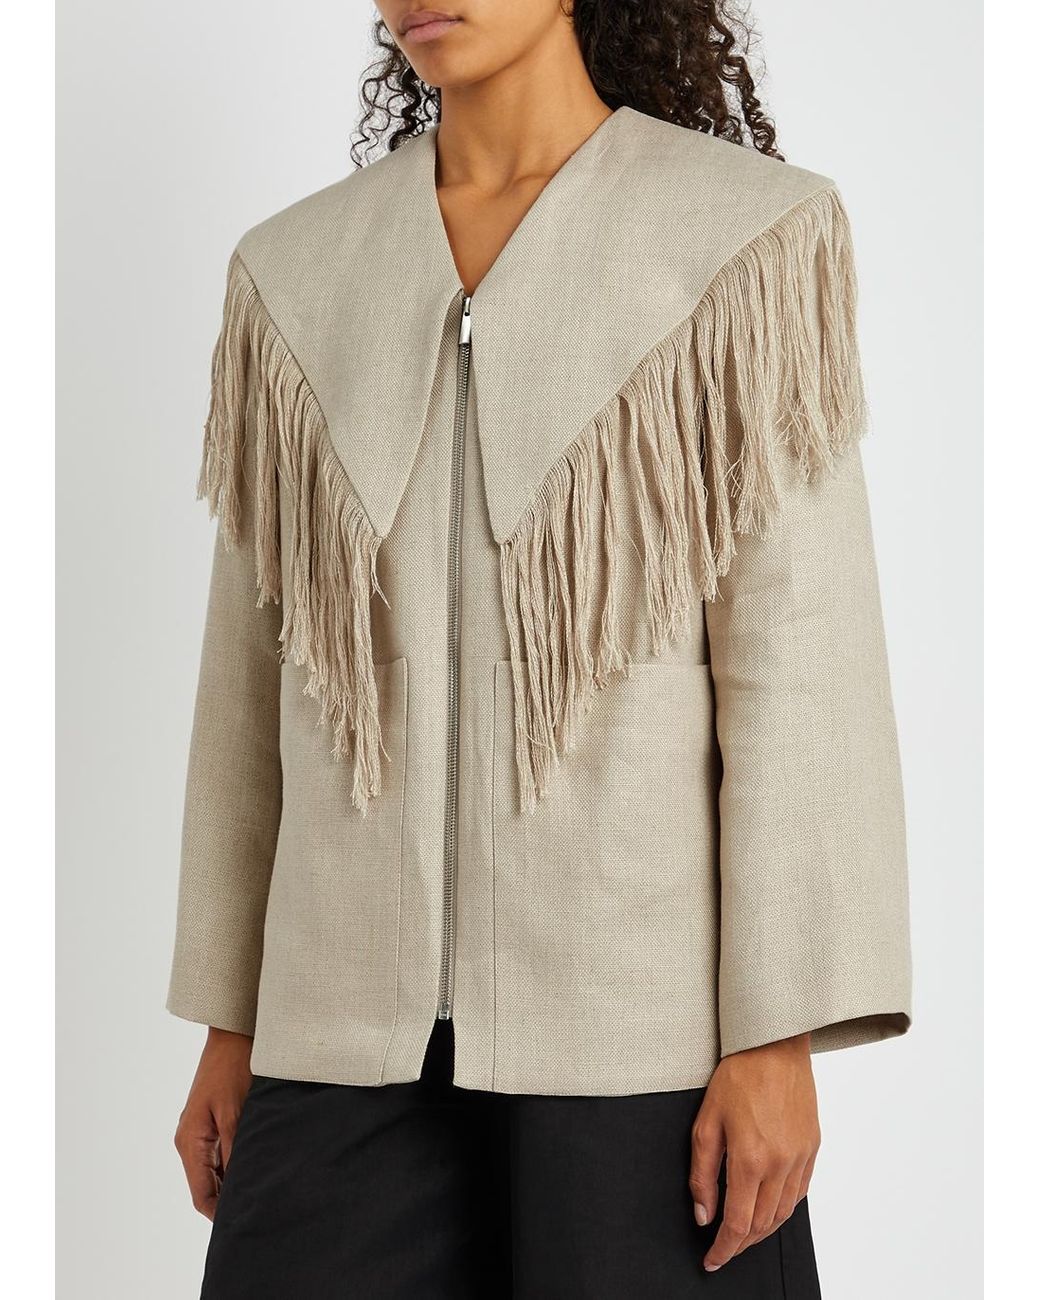 By Malene Birger Allies Sand Fringed Linen Jacket in Natural |